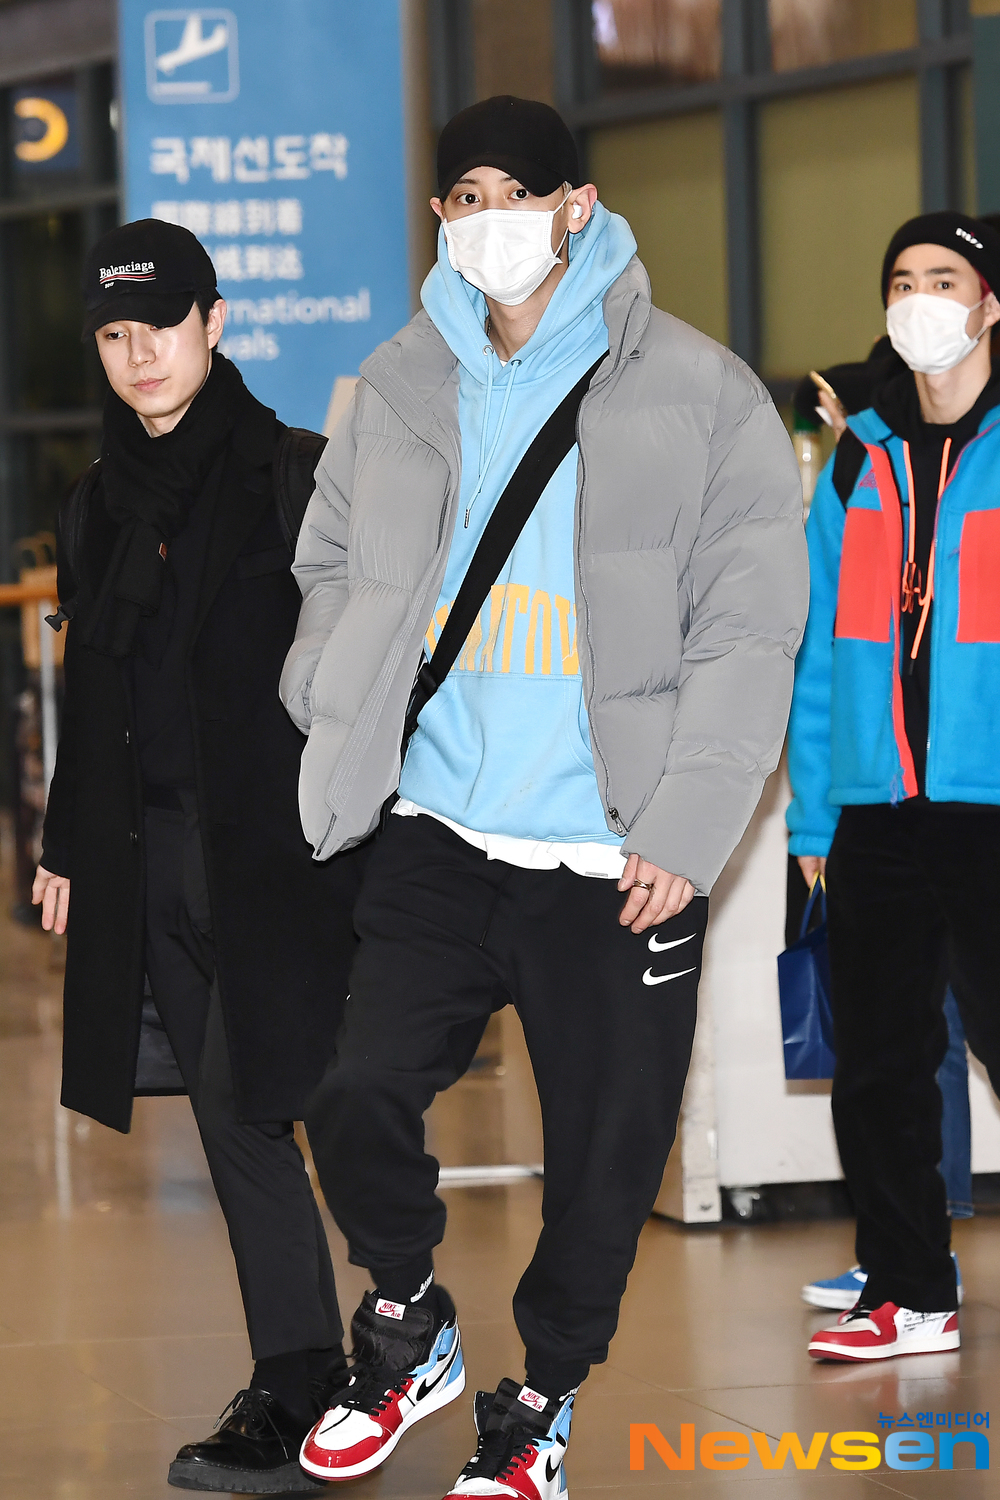 EXO (EXO) members Suho, Chanyeol, Kai, Baekhyun, Sehun and Chen arrived at the Incheon International Airport in Unseo-dong, Jung-gu, Incheon on the afternoon of December 23 after completing the EXO PLANET #5 - EXpLOration - In Japan schedule.EXO (EXO) member Chanyeol is leaving for Japan.exponential earthquake